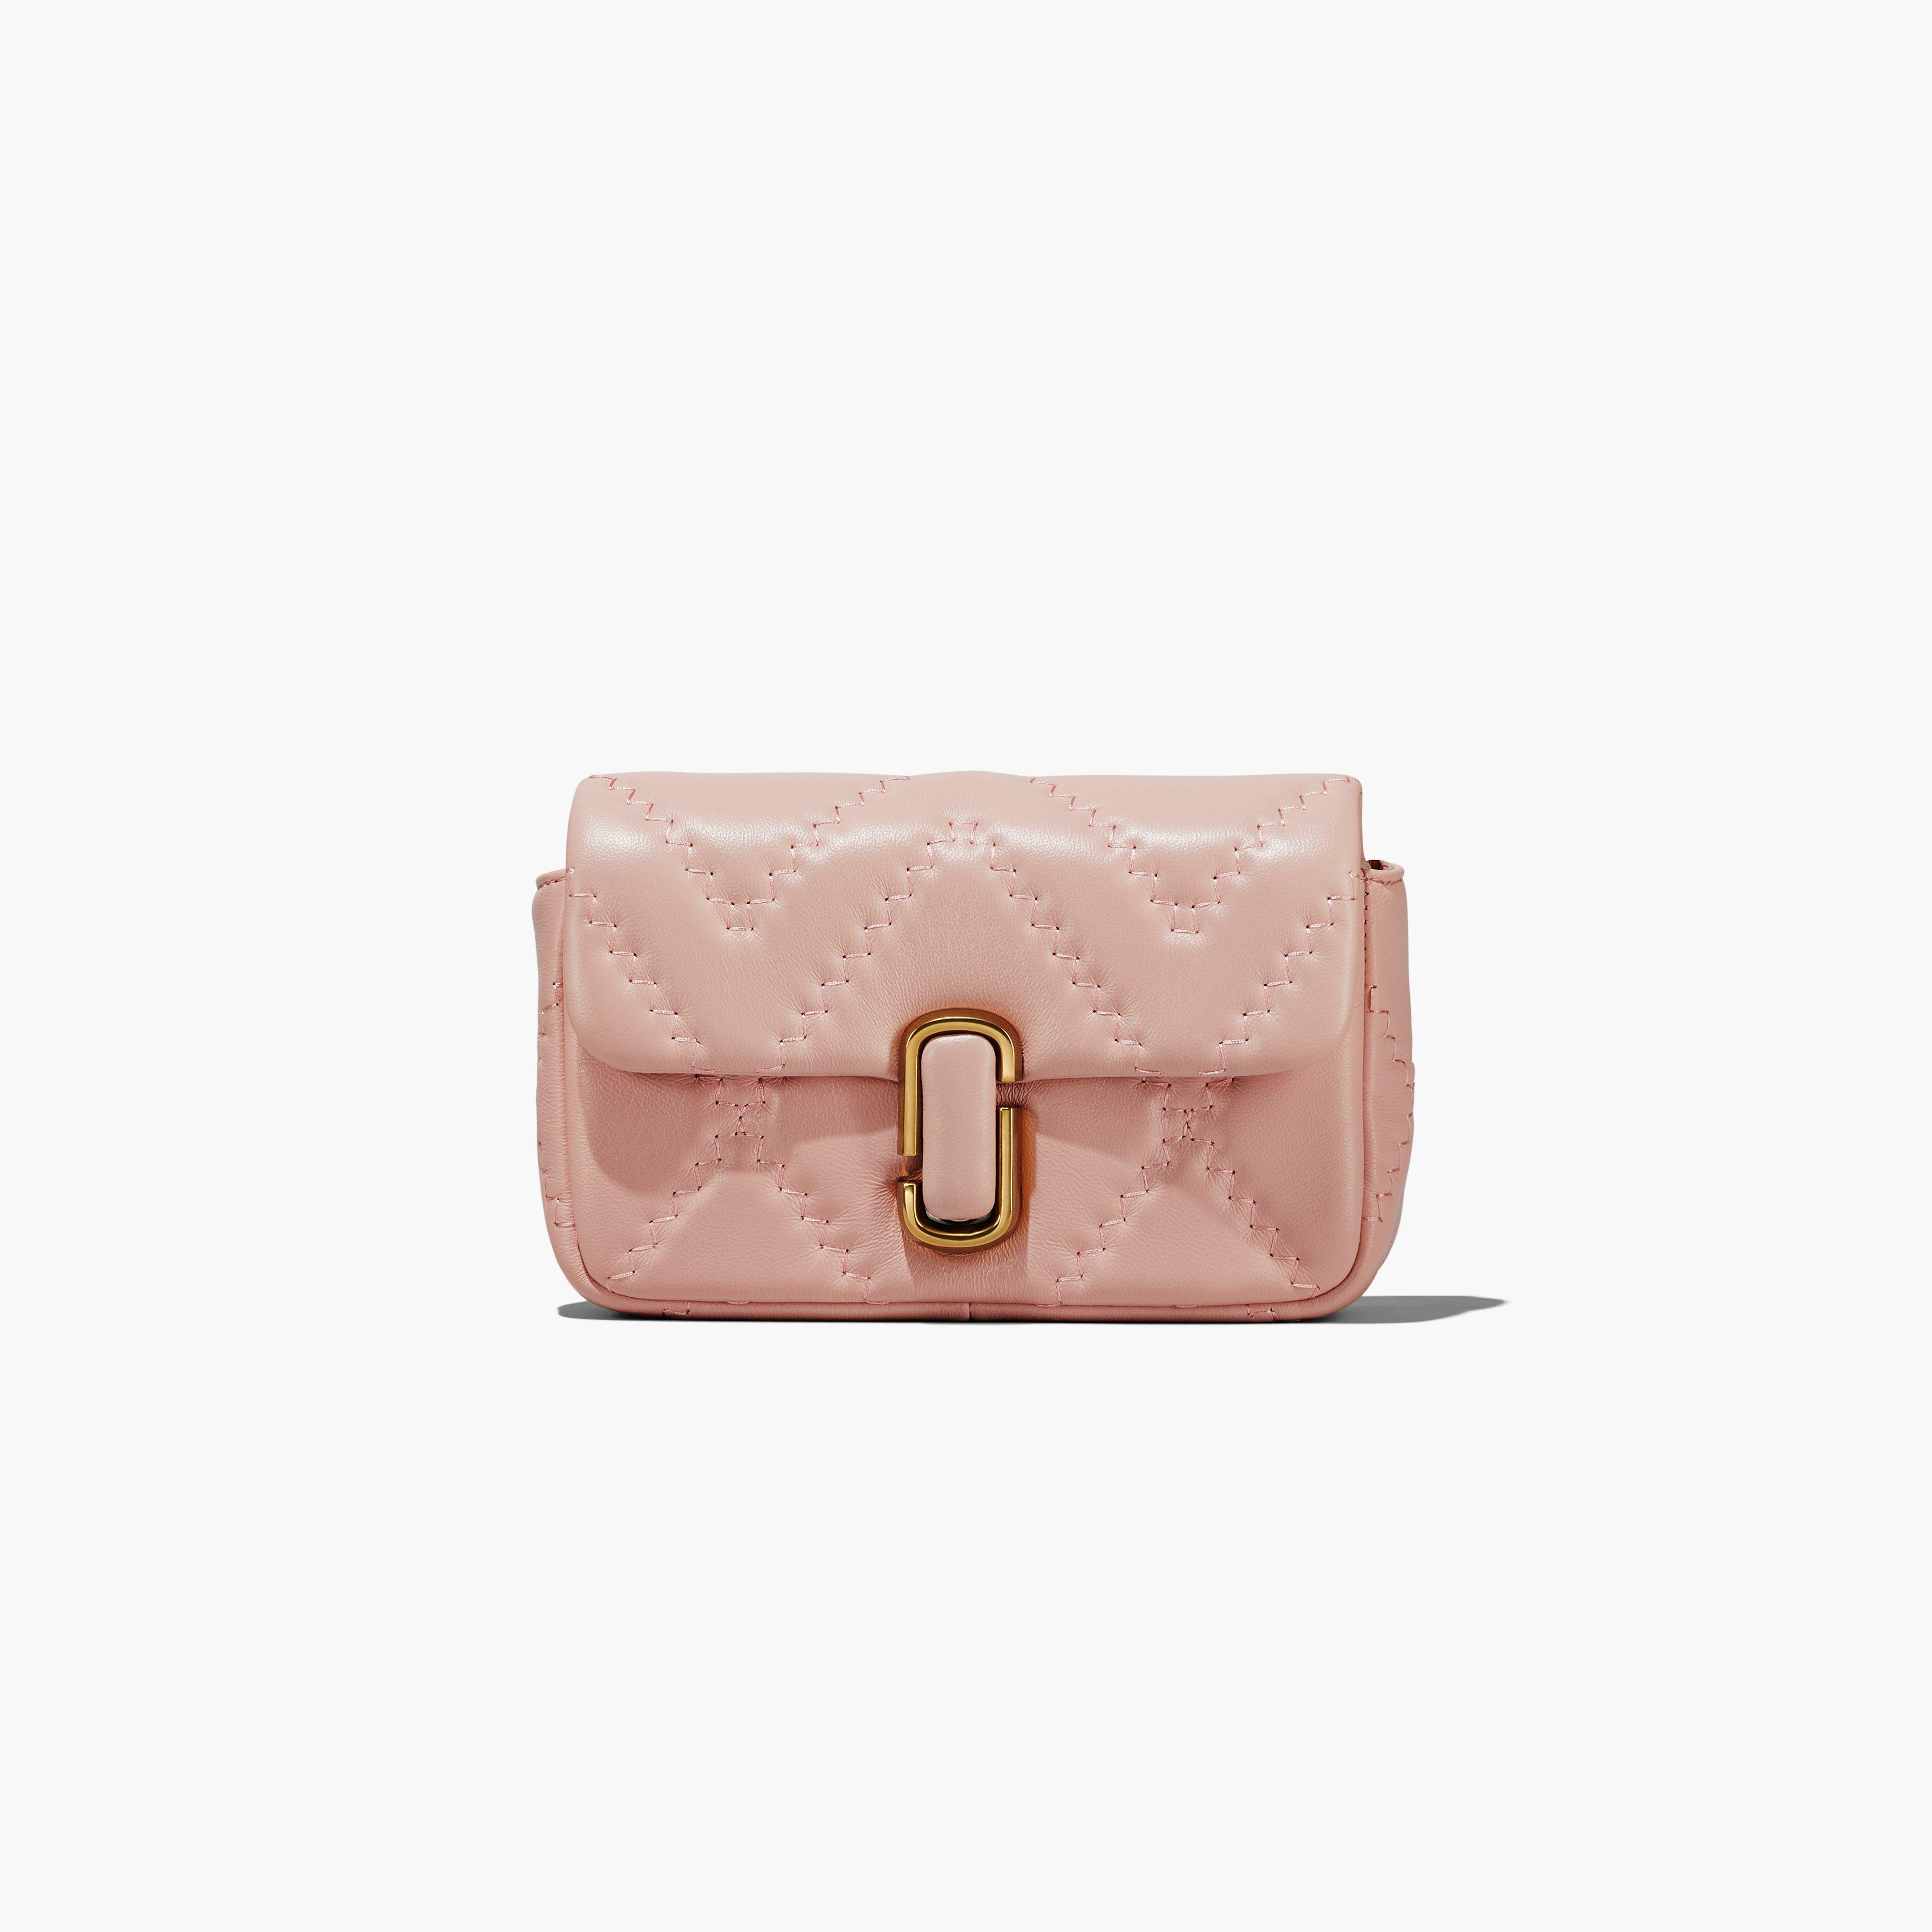 THE QUILTED LEATHER J MARC MINI SHOULDER BAG - 7